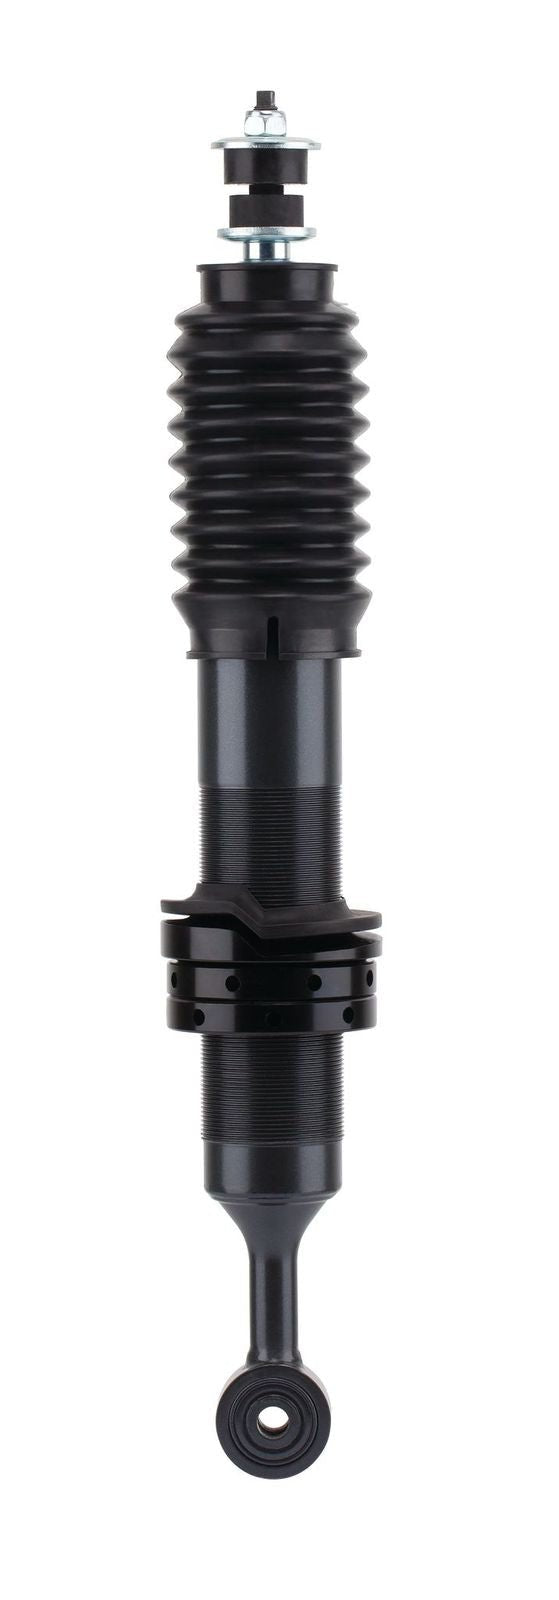 Shock Absorber - Foam Cell Pro Strut - Performance to suit Toyota Hilux Vigo 3/2005 - 9/2011 - Mick Tighe 4x4 & Outdoor-Ironman 4x4-45710FE--Shock Absorber - Foam Cell Pro Strut - Performance to suit Toyota Hilux Vigo 3/2005 - 9/2011